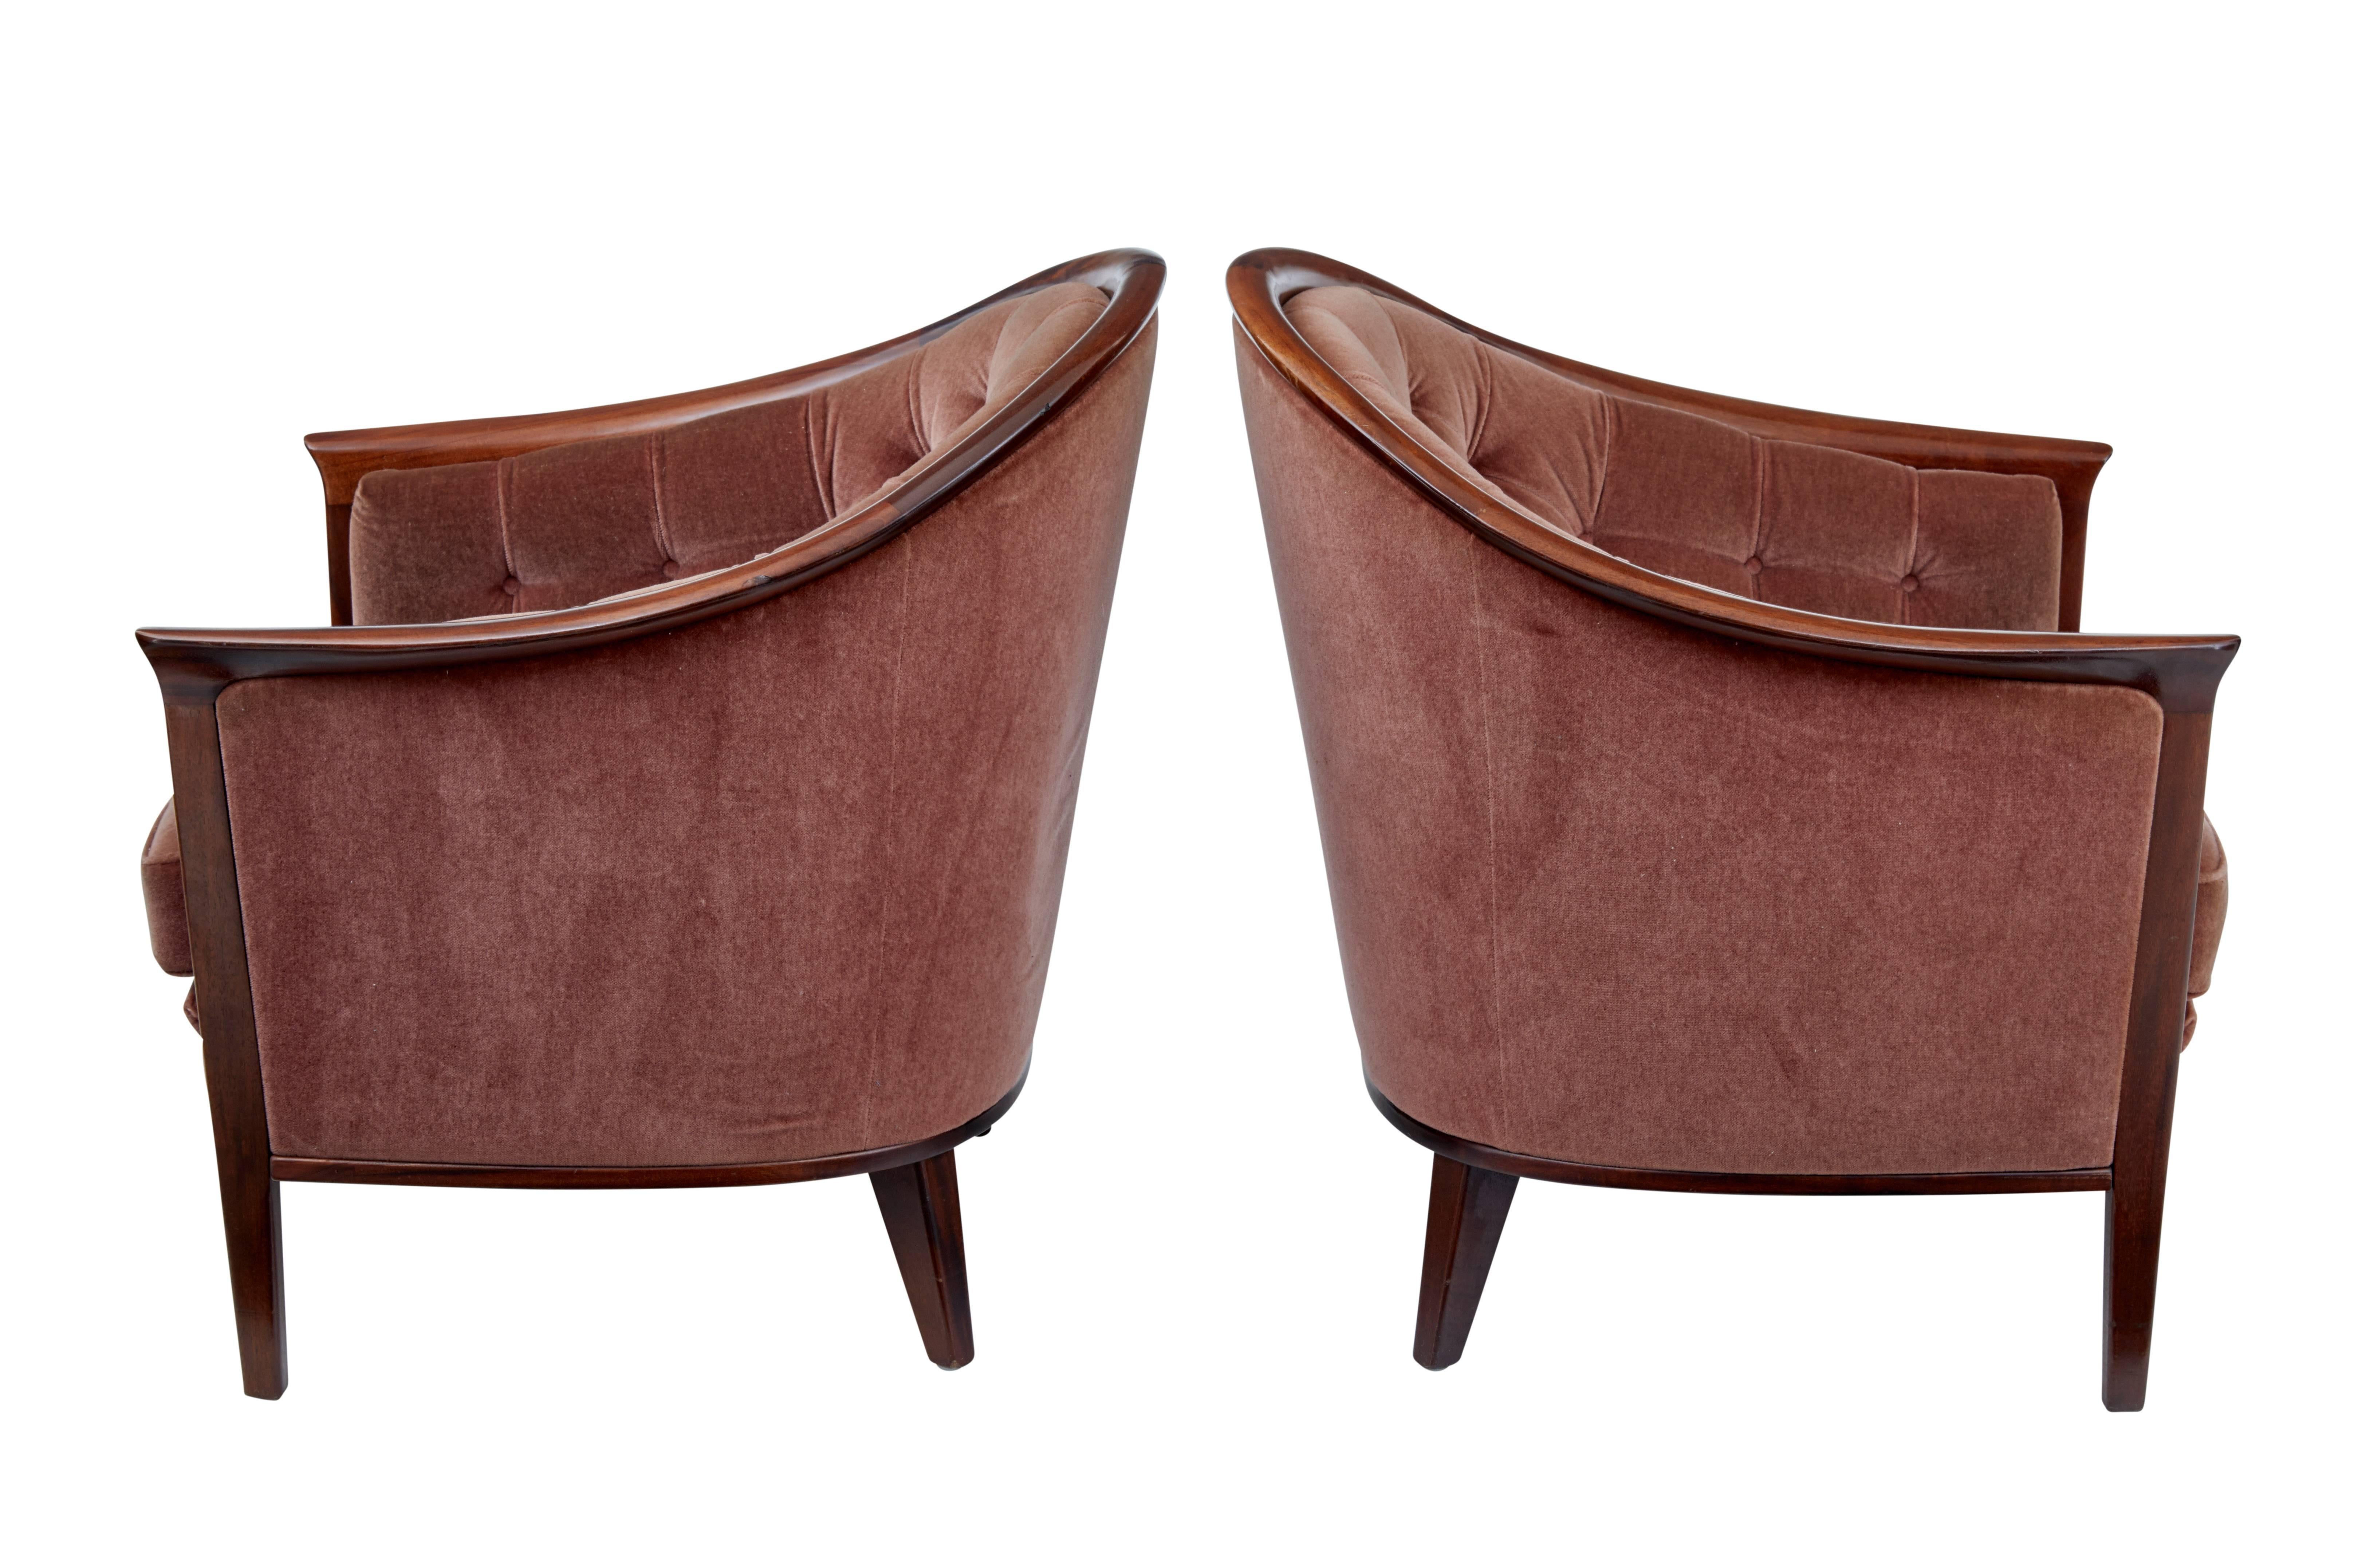 Good quality pair of Andersson horseshoe shaped armchairs, circa 1960.
Dark stained teak frames with faux velvet upholstery.
Some marking to woodwork on the backs of the chairs (photographed)
Some minor staining to fabric.

Measures: Height 32